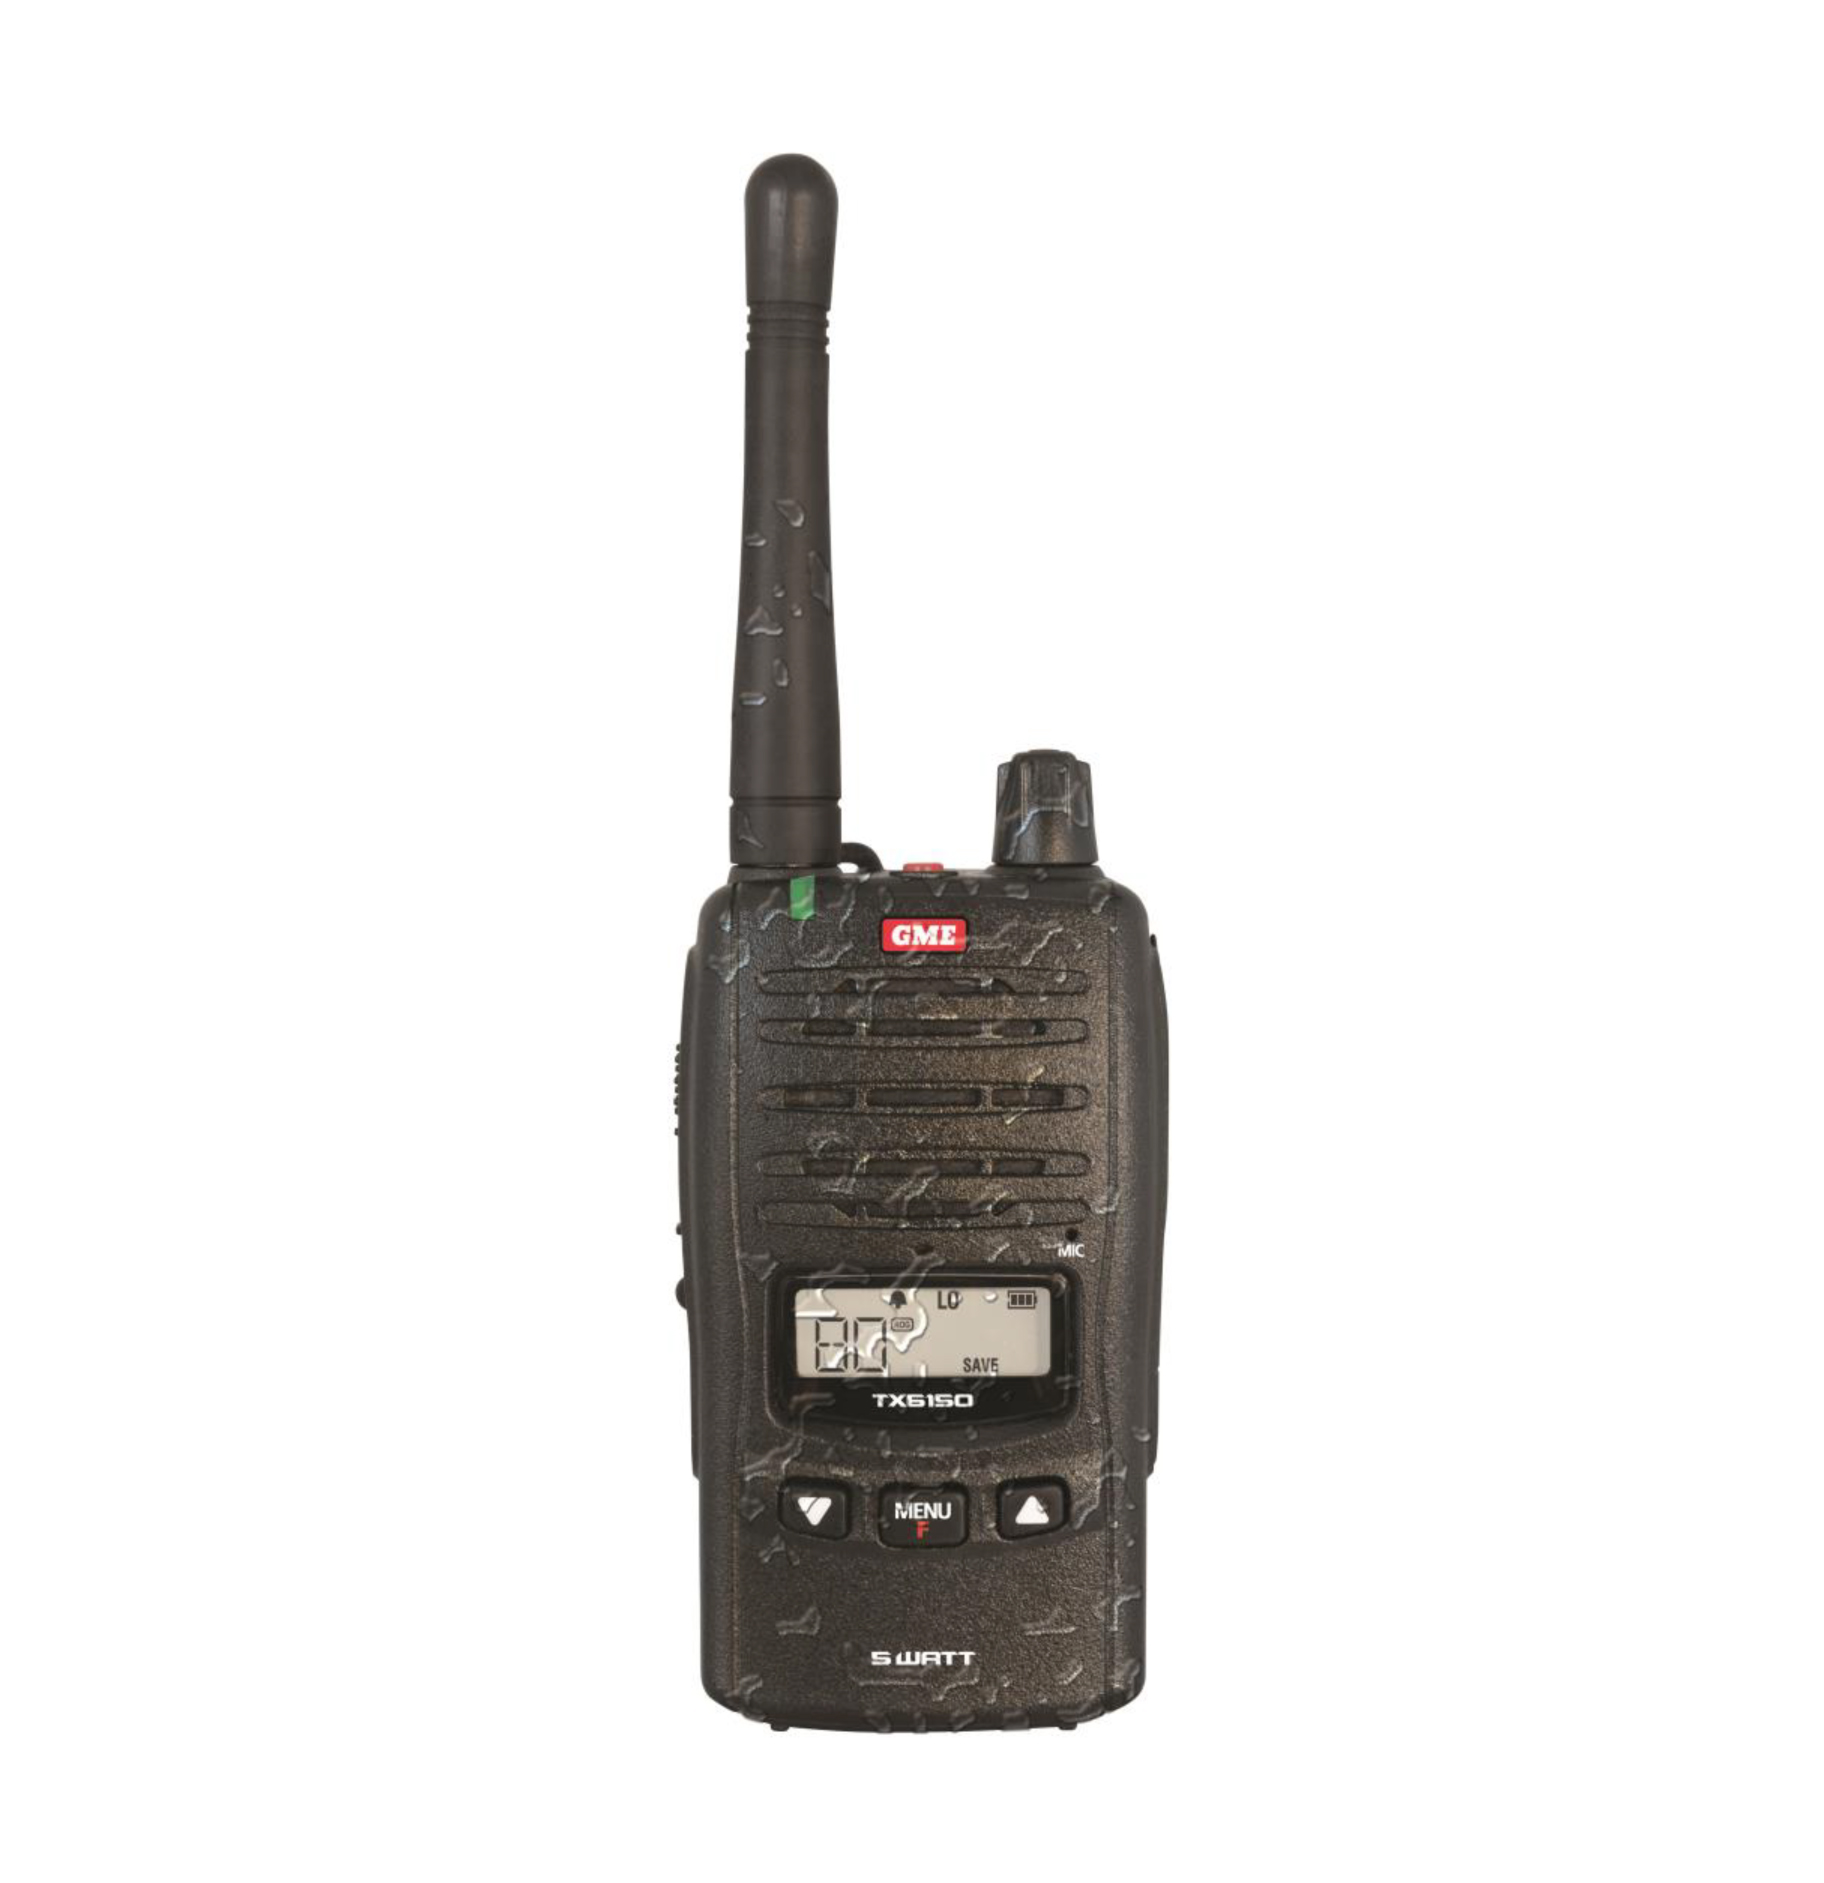 CB Radio - Image showing GME TX6150 water and dust proof CB radio